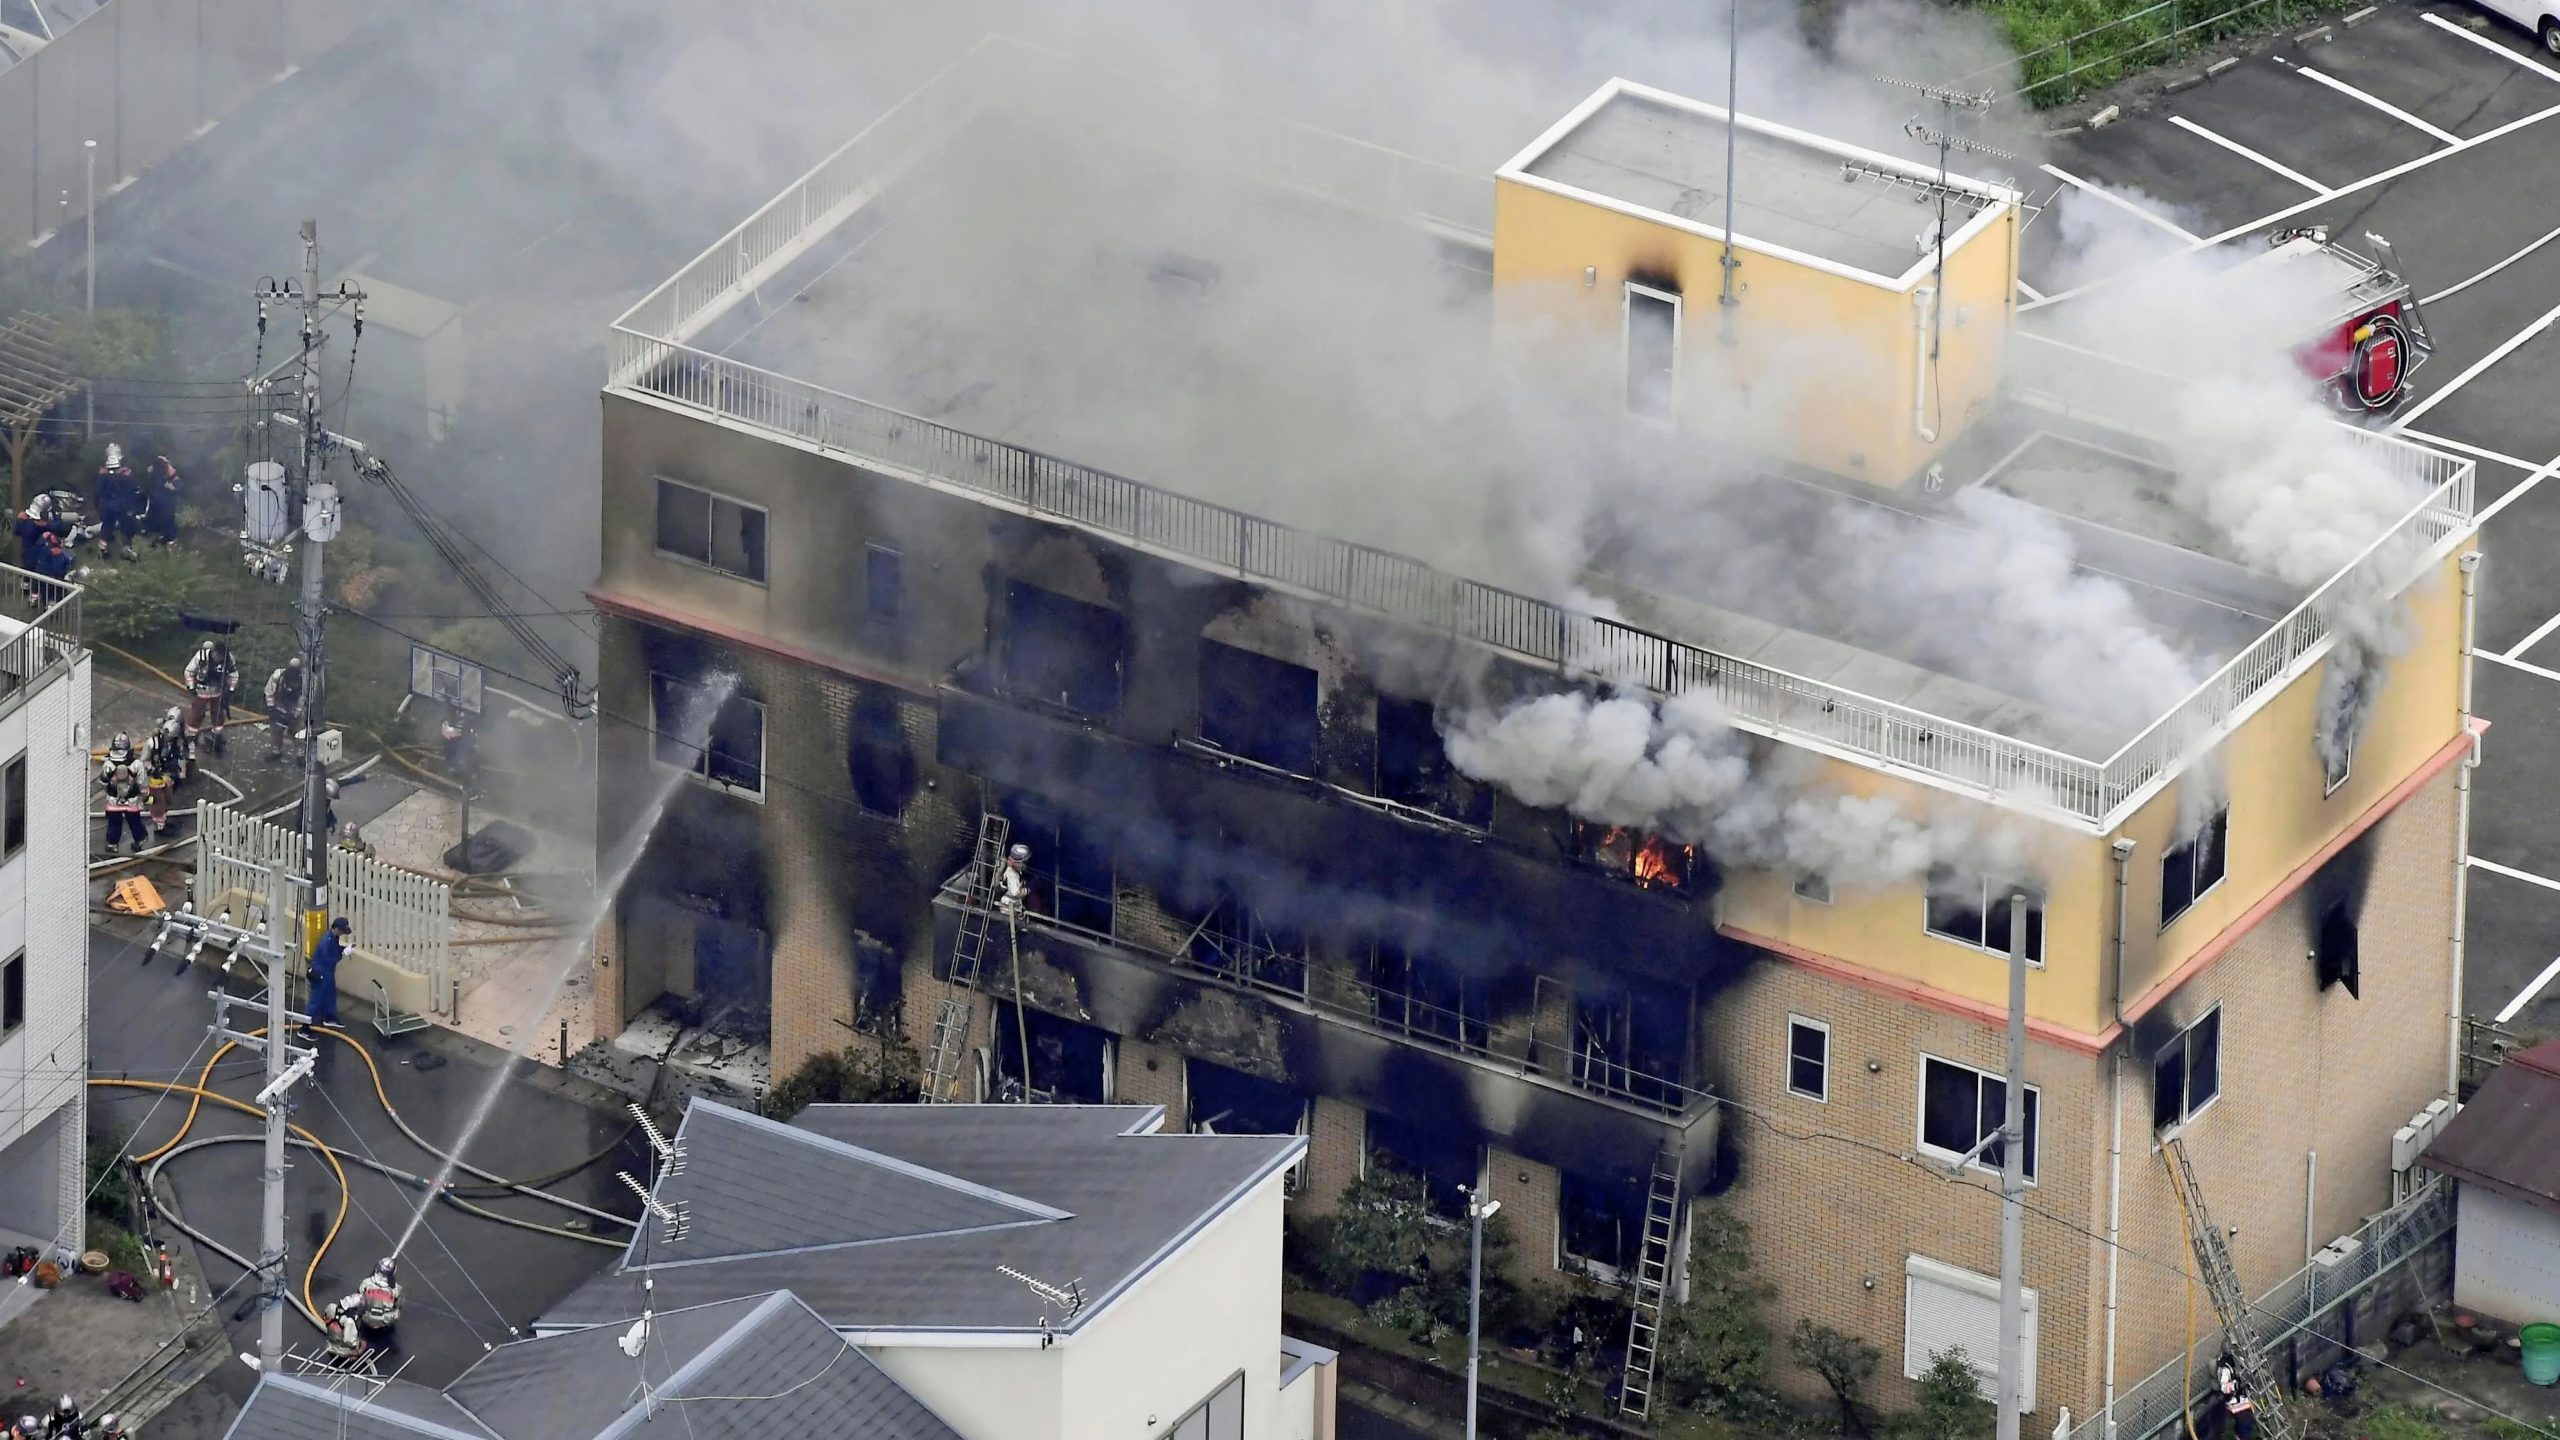 33 dead after man sets fire to Kyoto anime studio